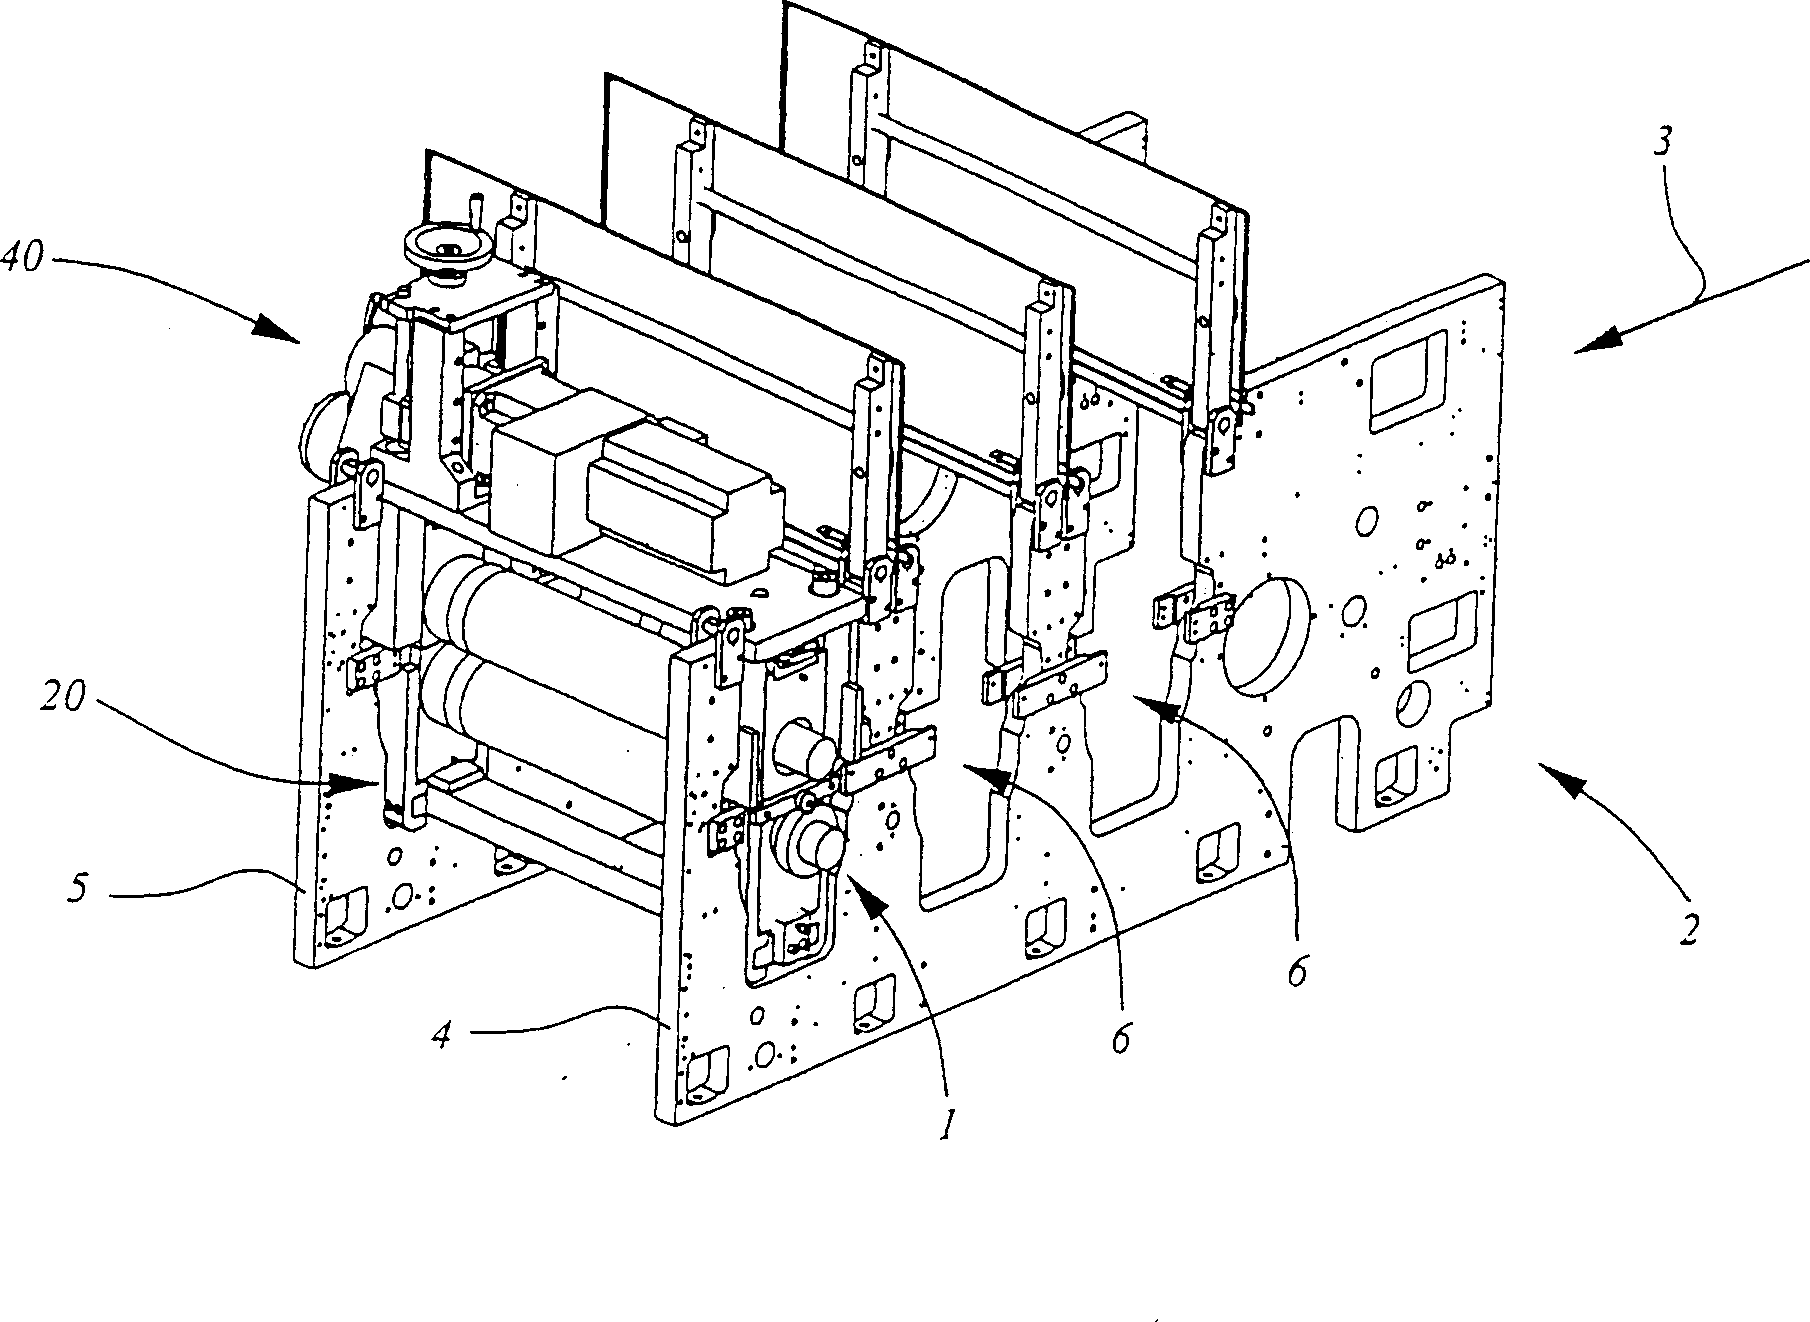 Device for rotary working into coil or piece material